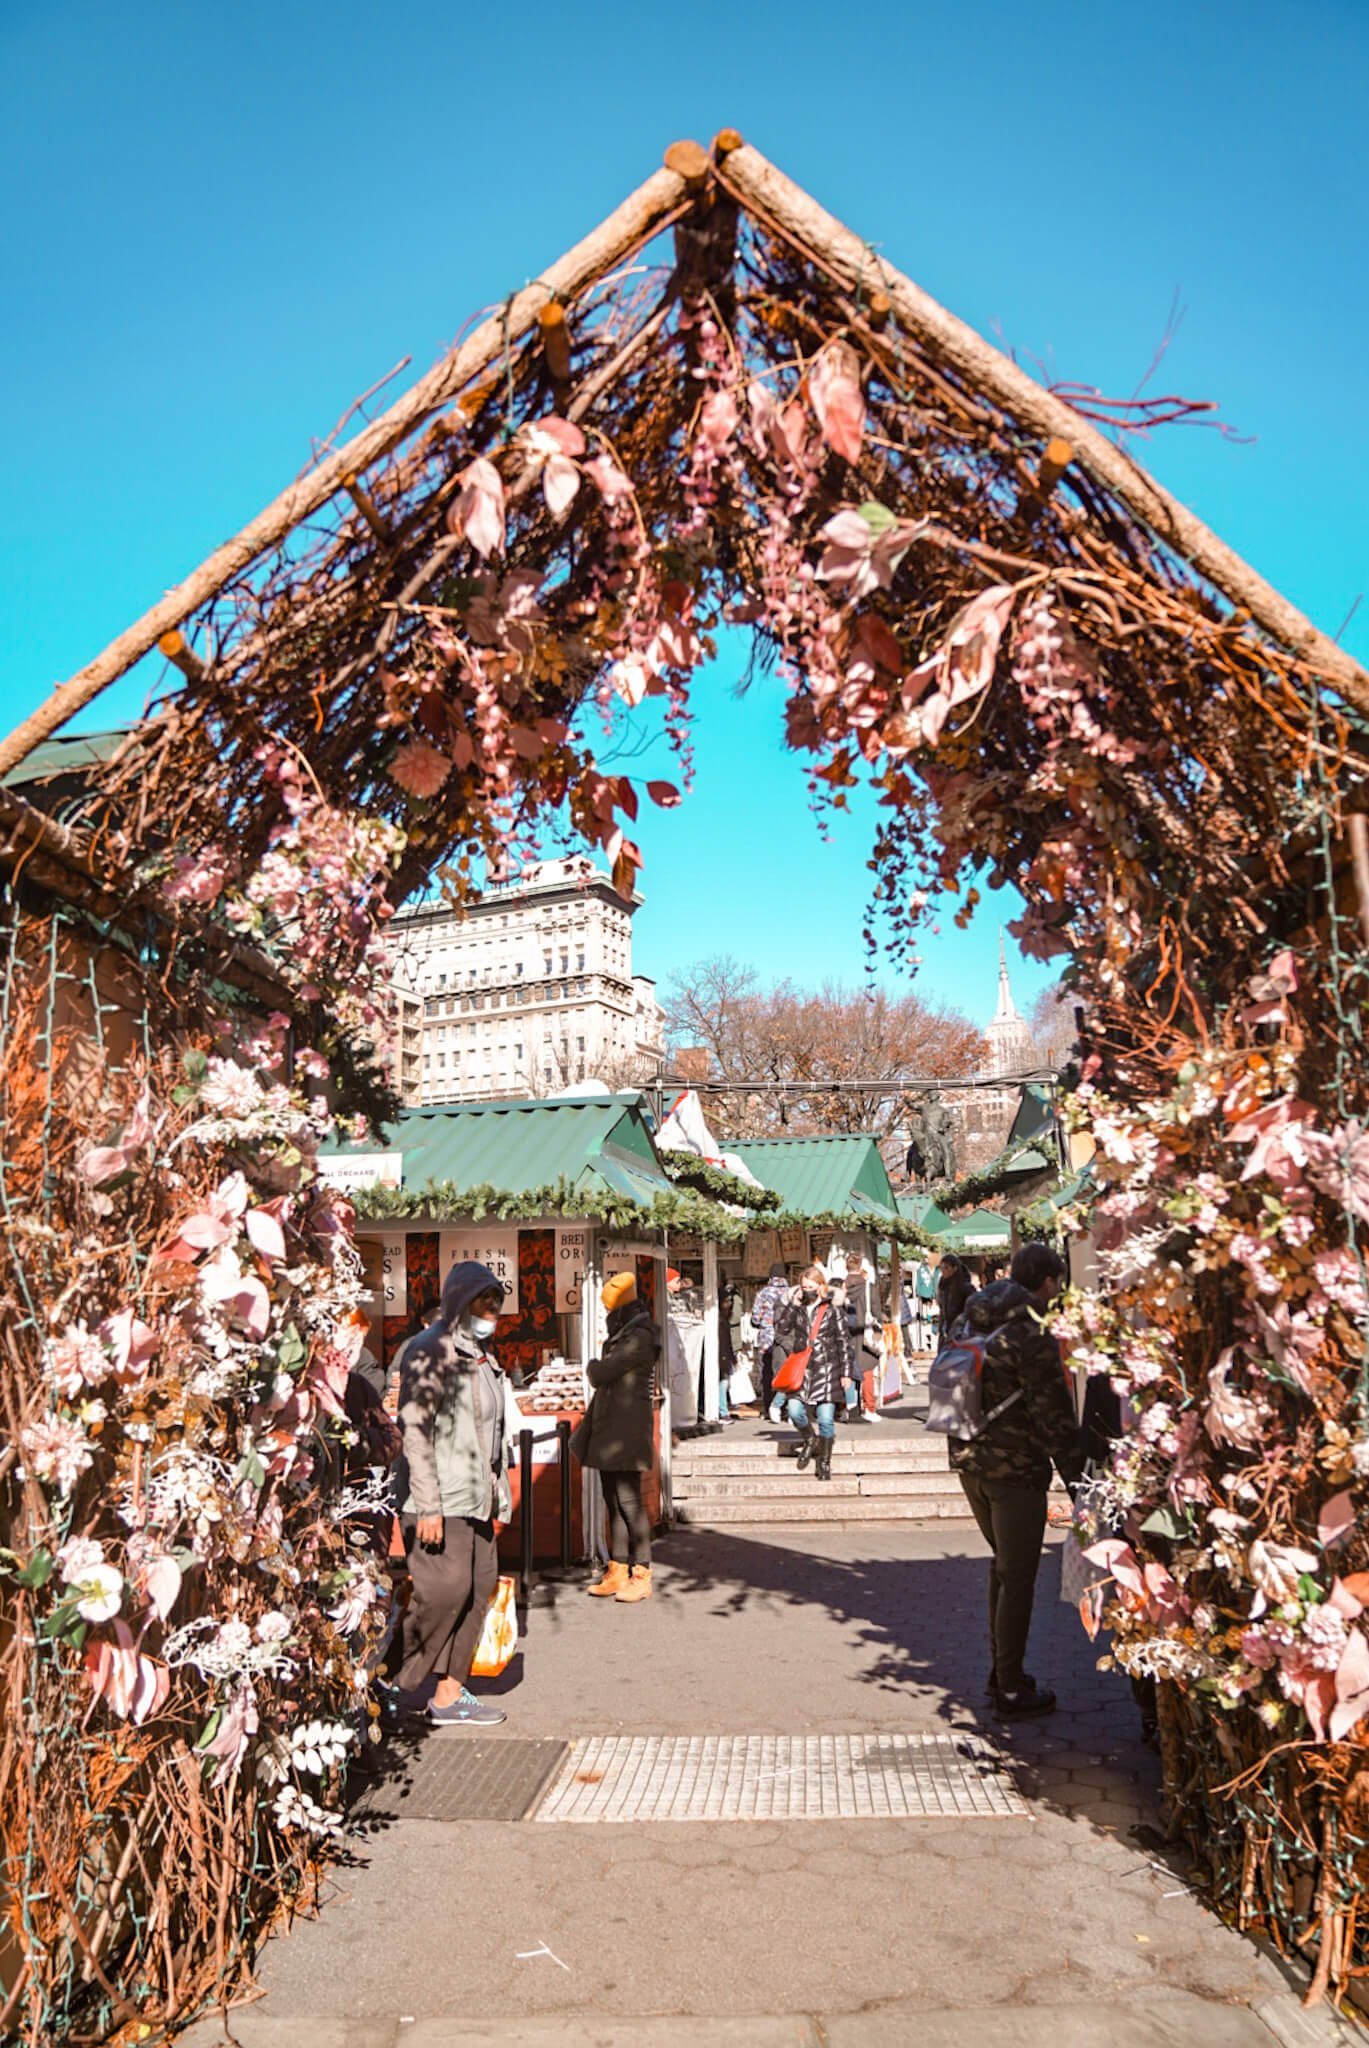 Union Square Market, things to do in December in New York